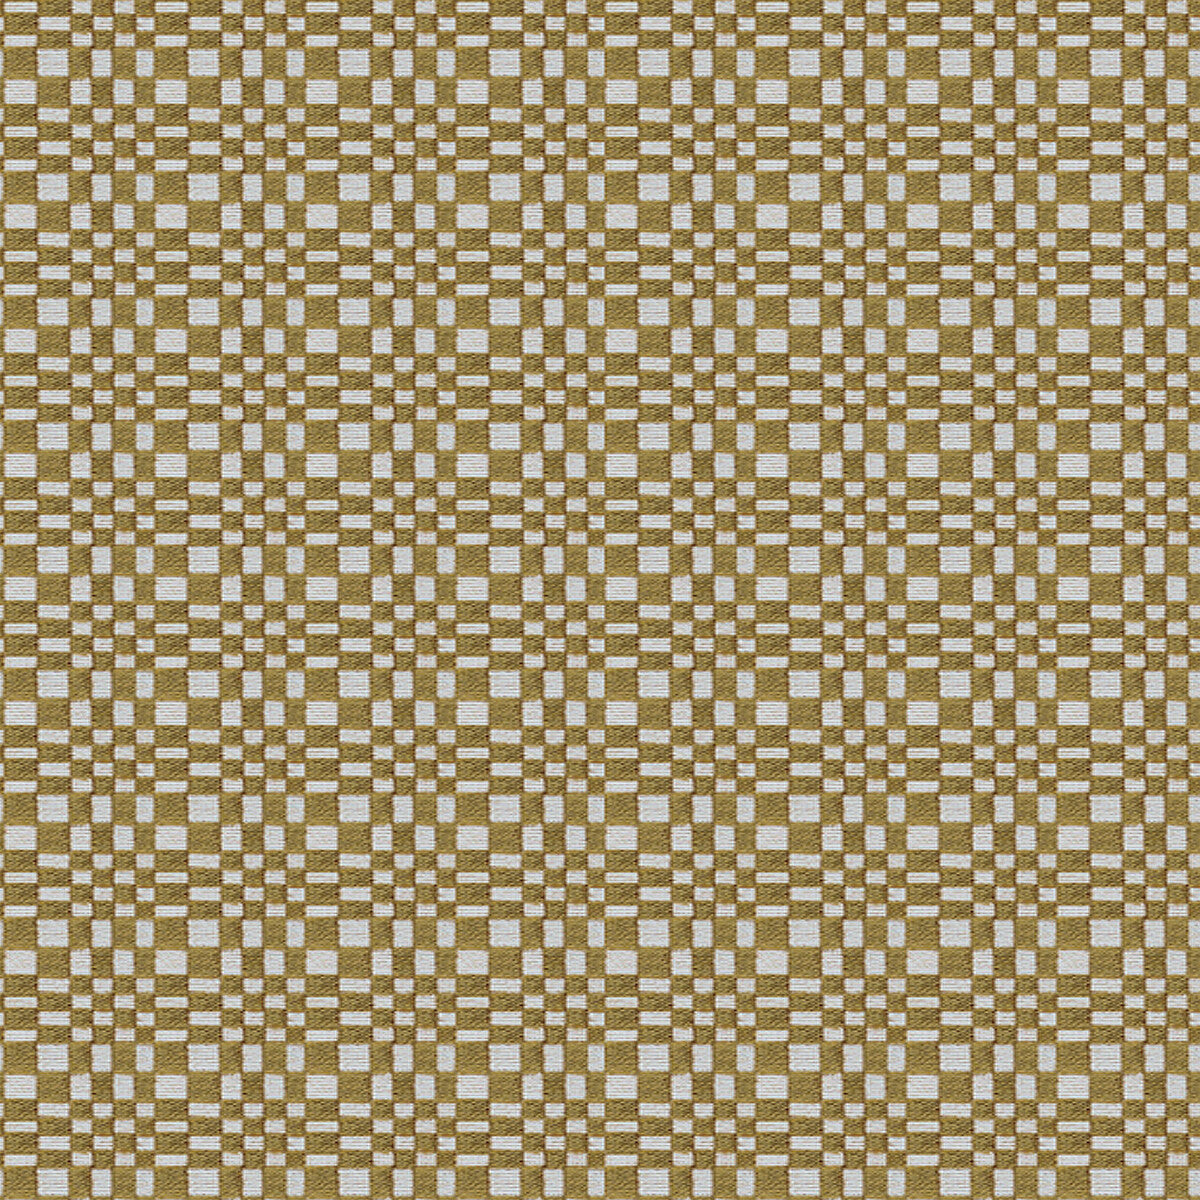 Santa Eulalia fabric in tostado color - pattern GDT5686.005.0 - by Gaston y Daniela in the Gaston Maiorica collection